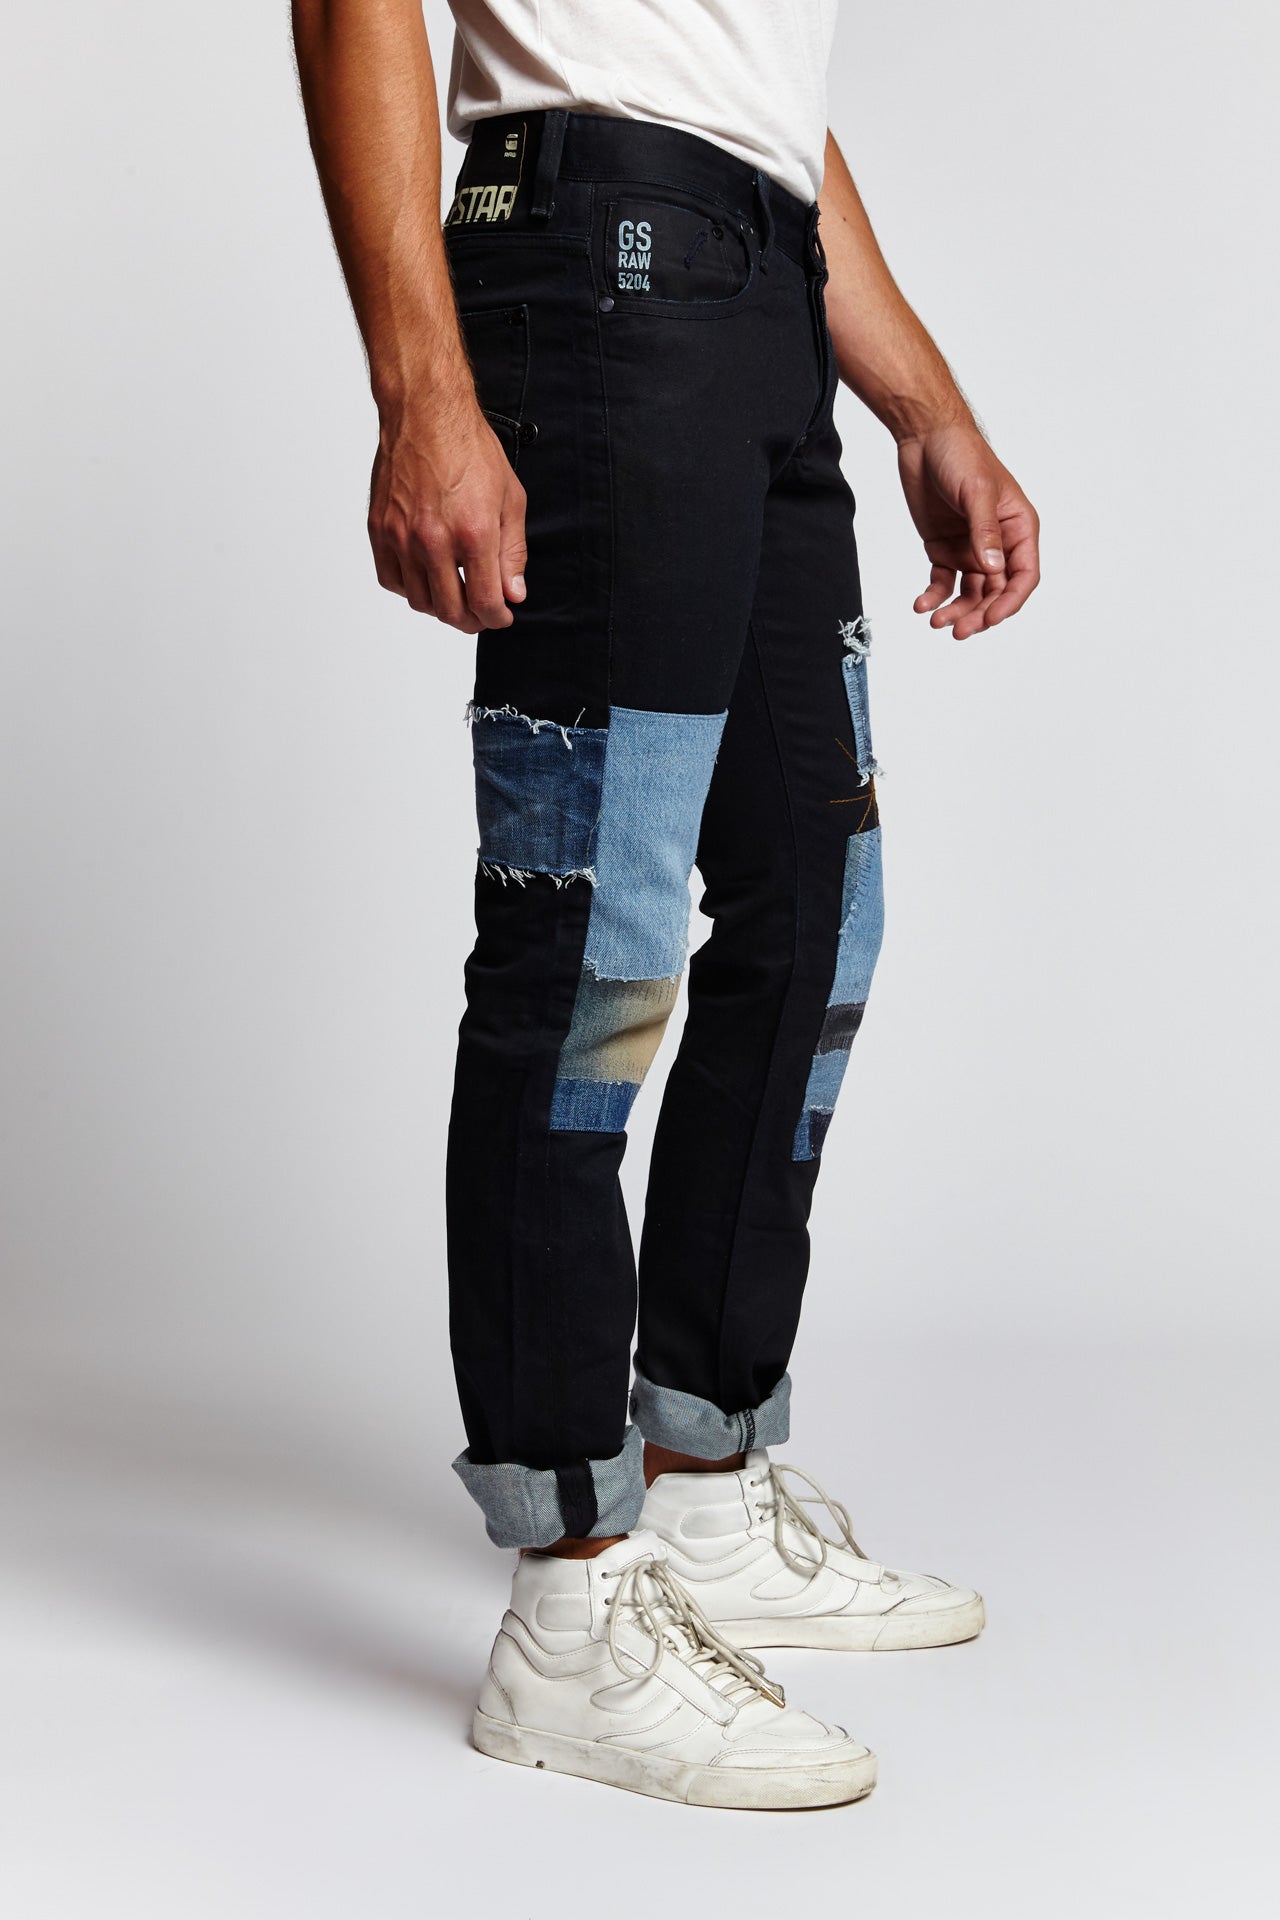 Nauw tennis Manga G-STAR RAW RECONSTRUCTED PATCHWORK COTTON JEANS IN BLACK (32 W) - MUNDANE  CLOTHING